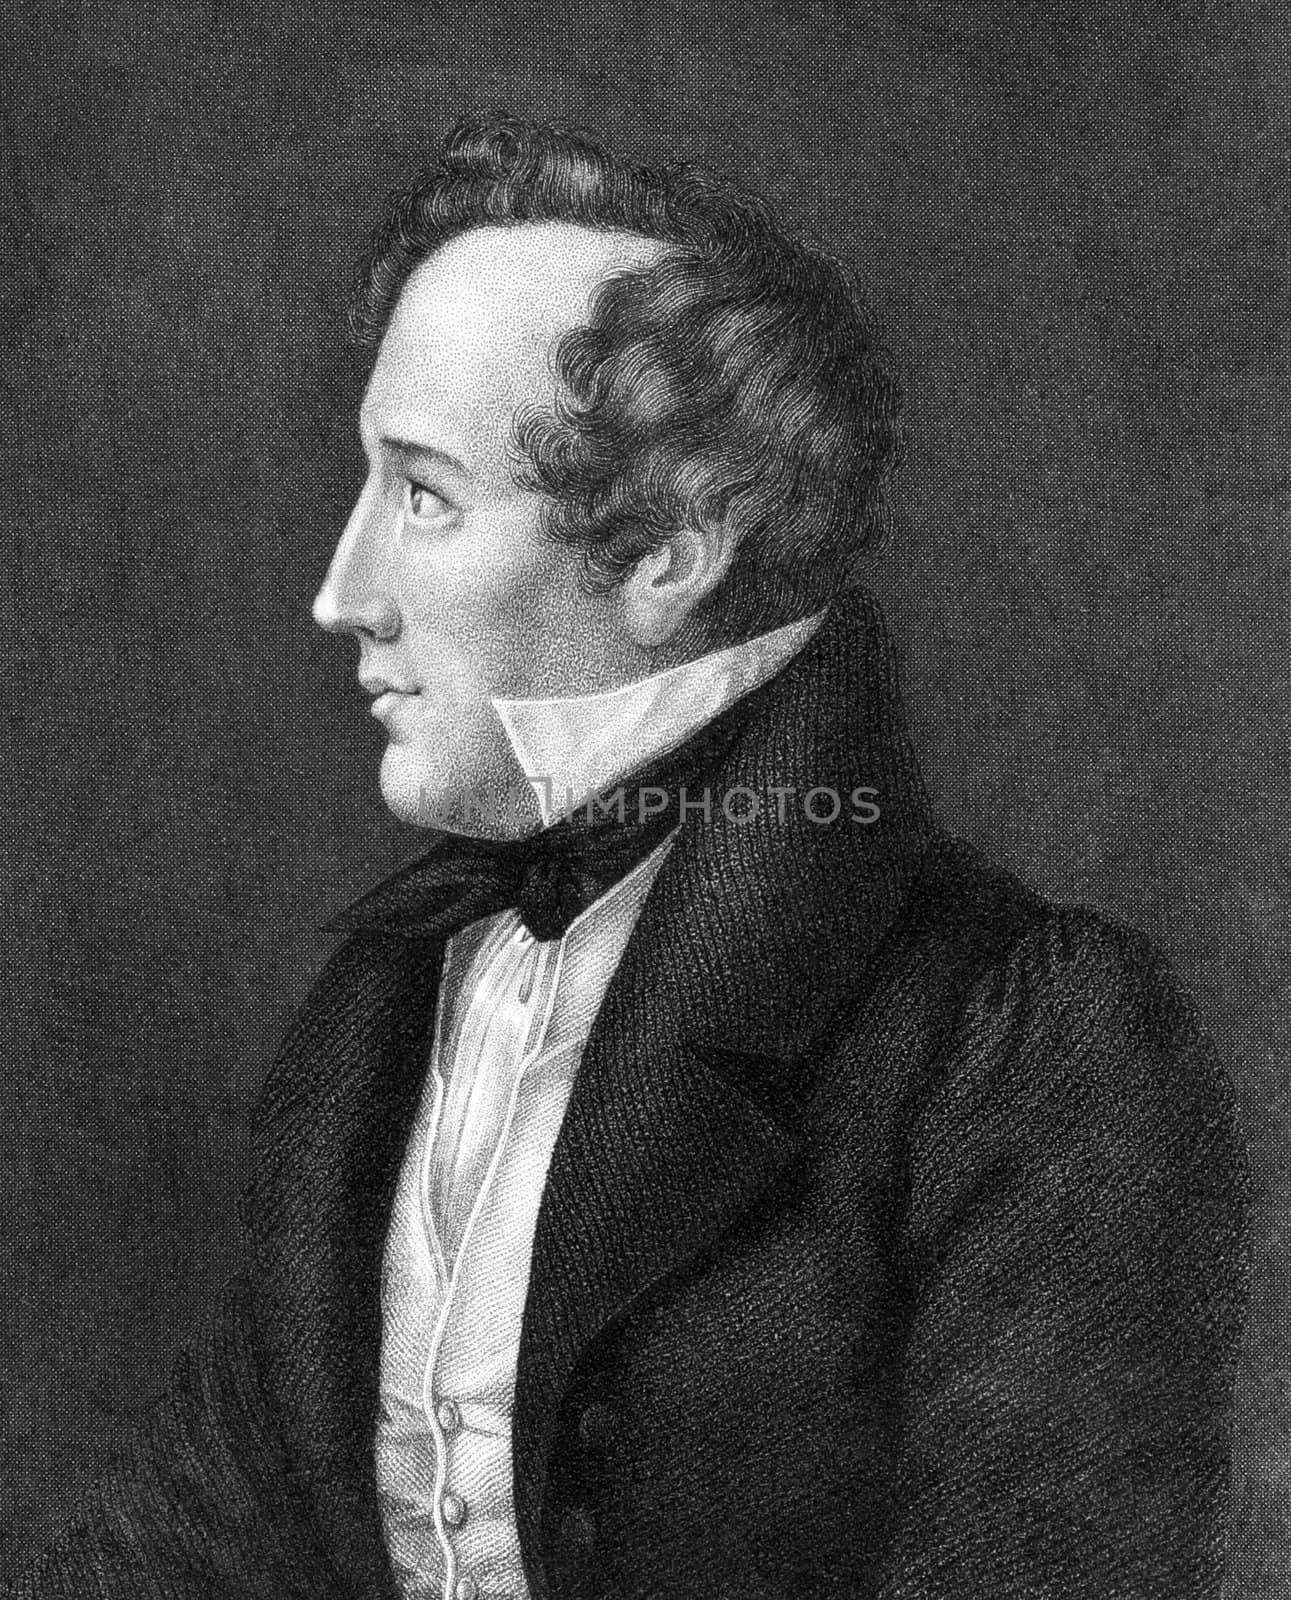 Felix Mendelssohn (1809-1847) on engraving from 1859. German composer, pianist, organist and conductor of the early Romantic period. Engraved by C.Mayer and published in Meyers Konversations-Lexikon, Germany,1859.